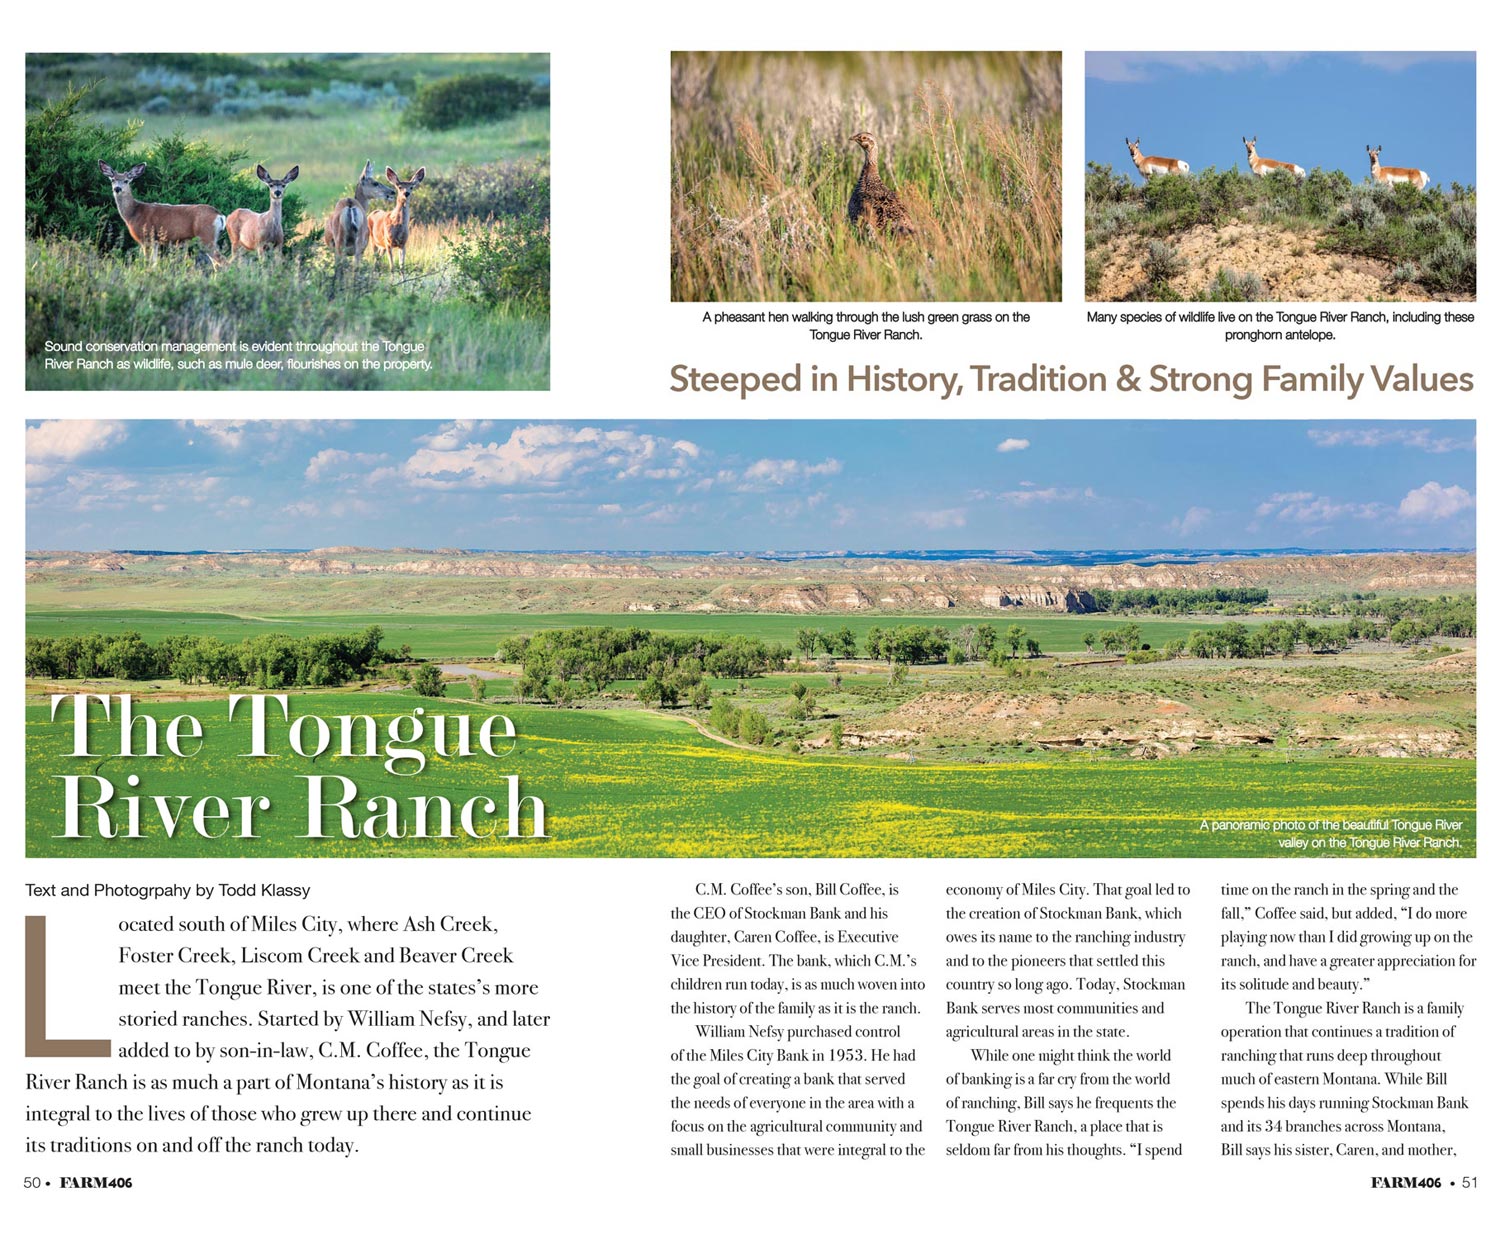 Ranching photos and authored article published in agriculture magazine